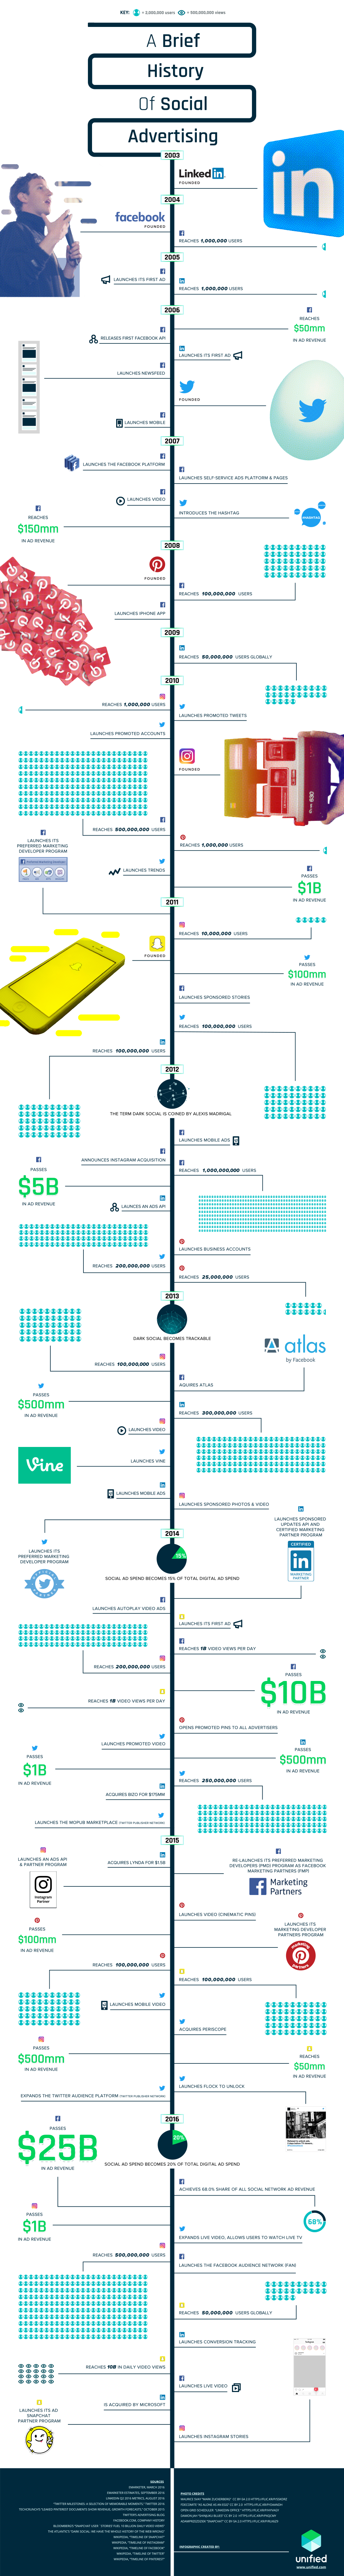 A Brief History of Social Advertising - #Infographic